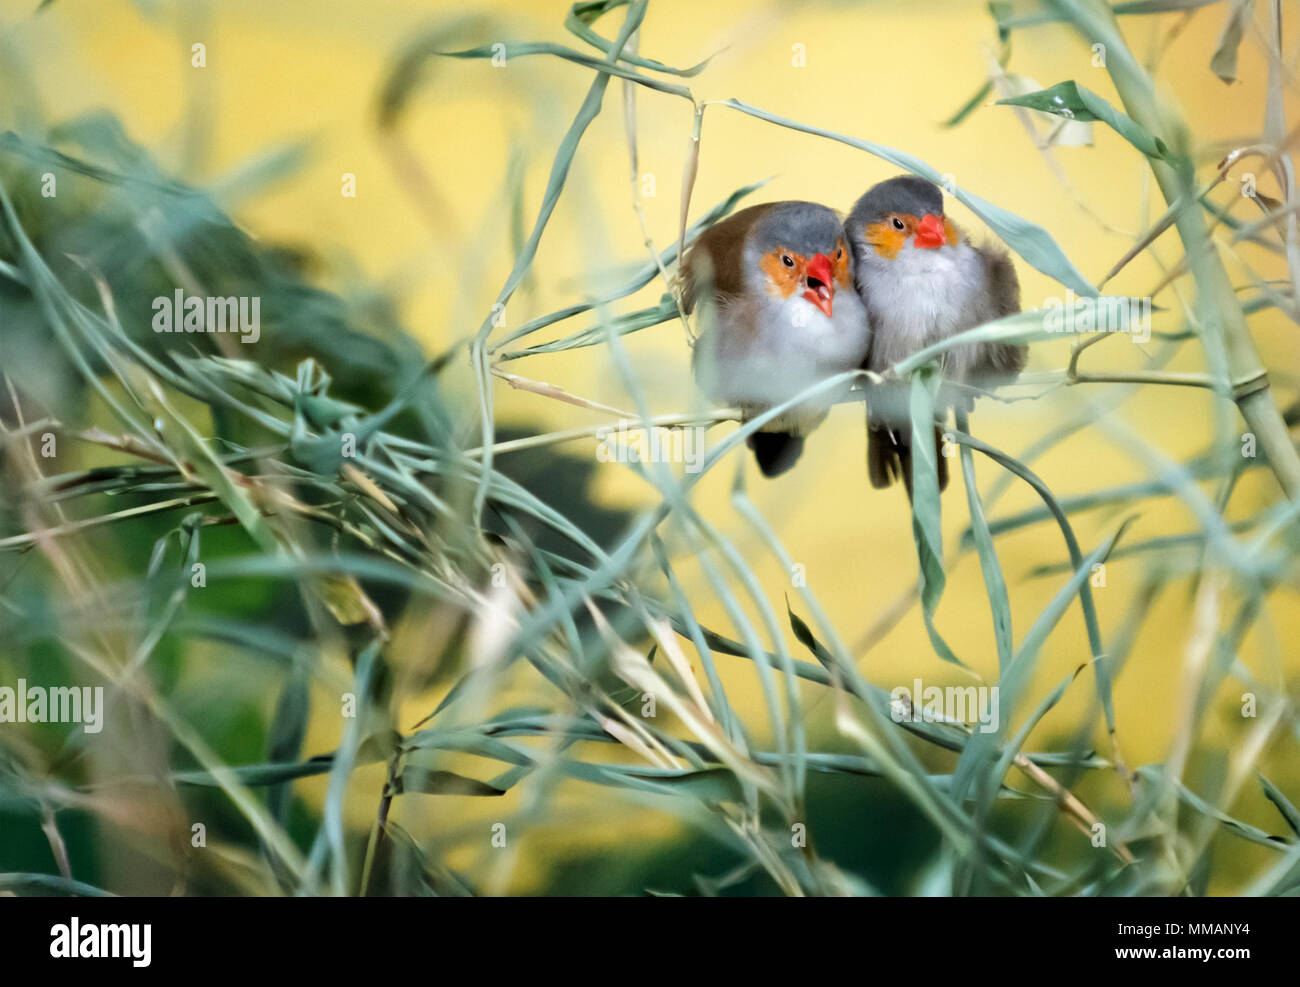 A pair of colorful love birds snuggling on a tree branch. Stock Photo